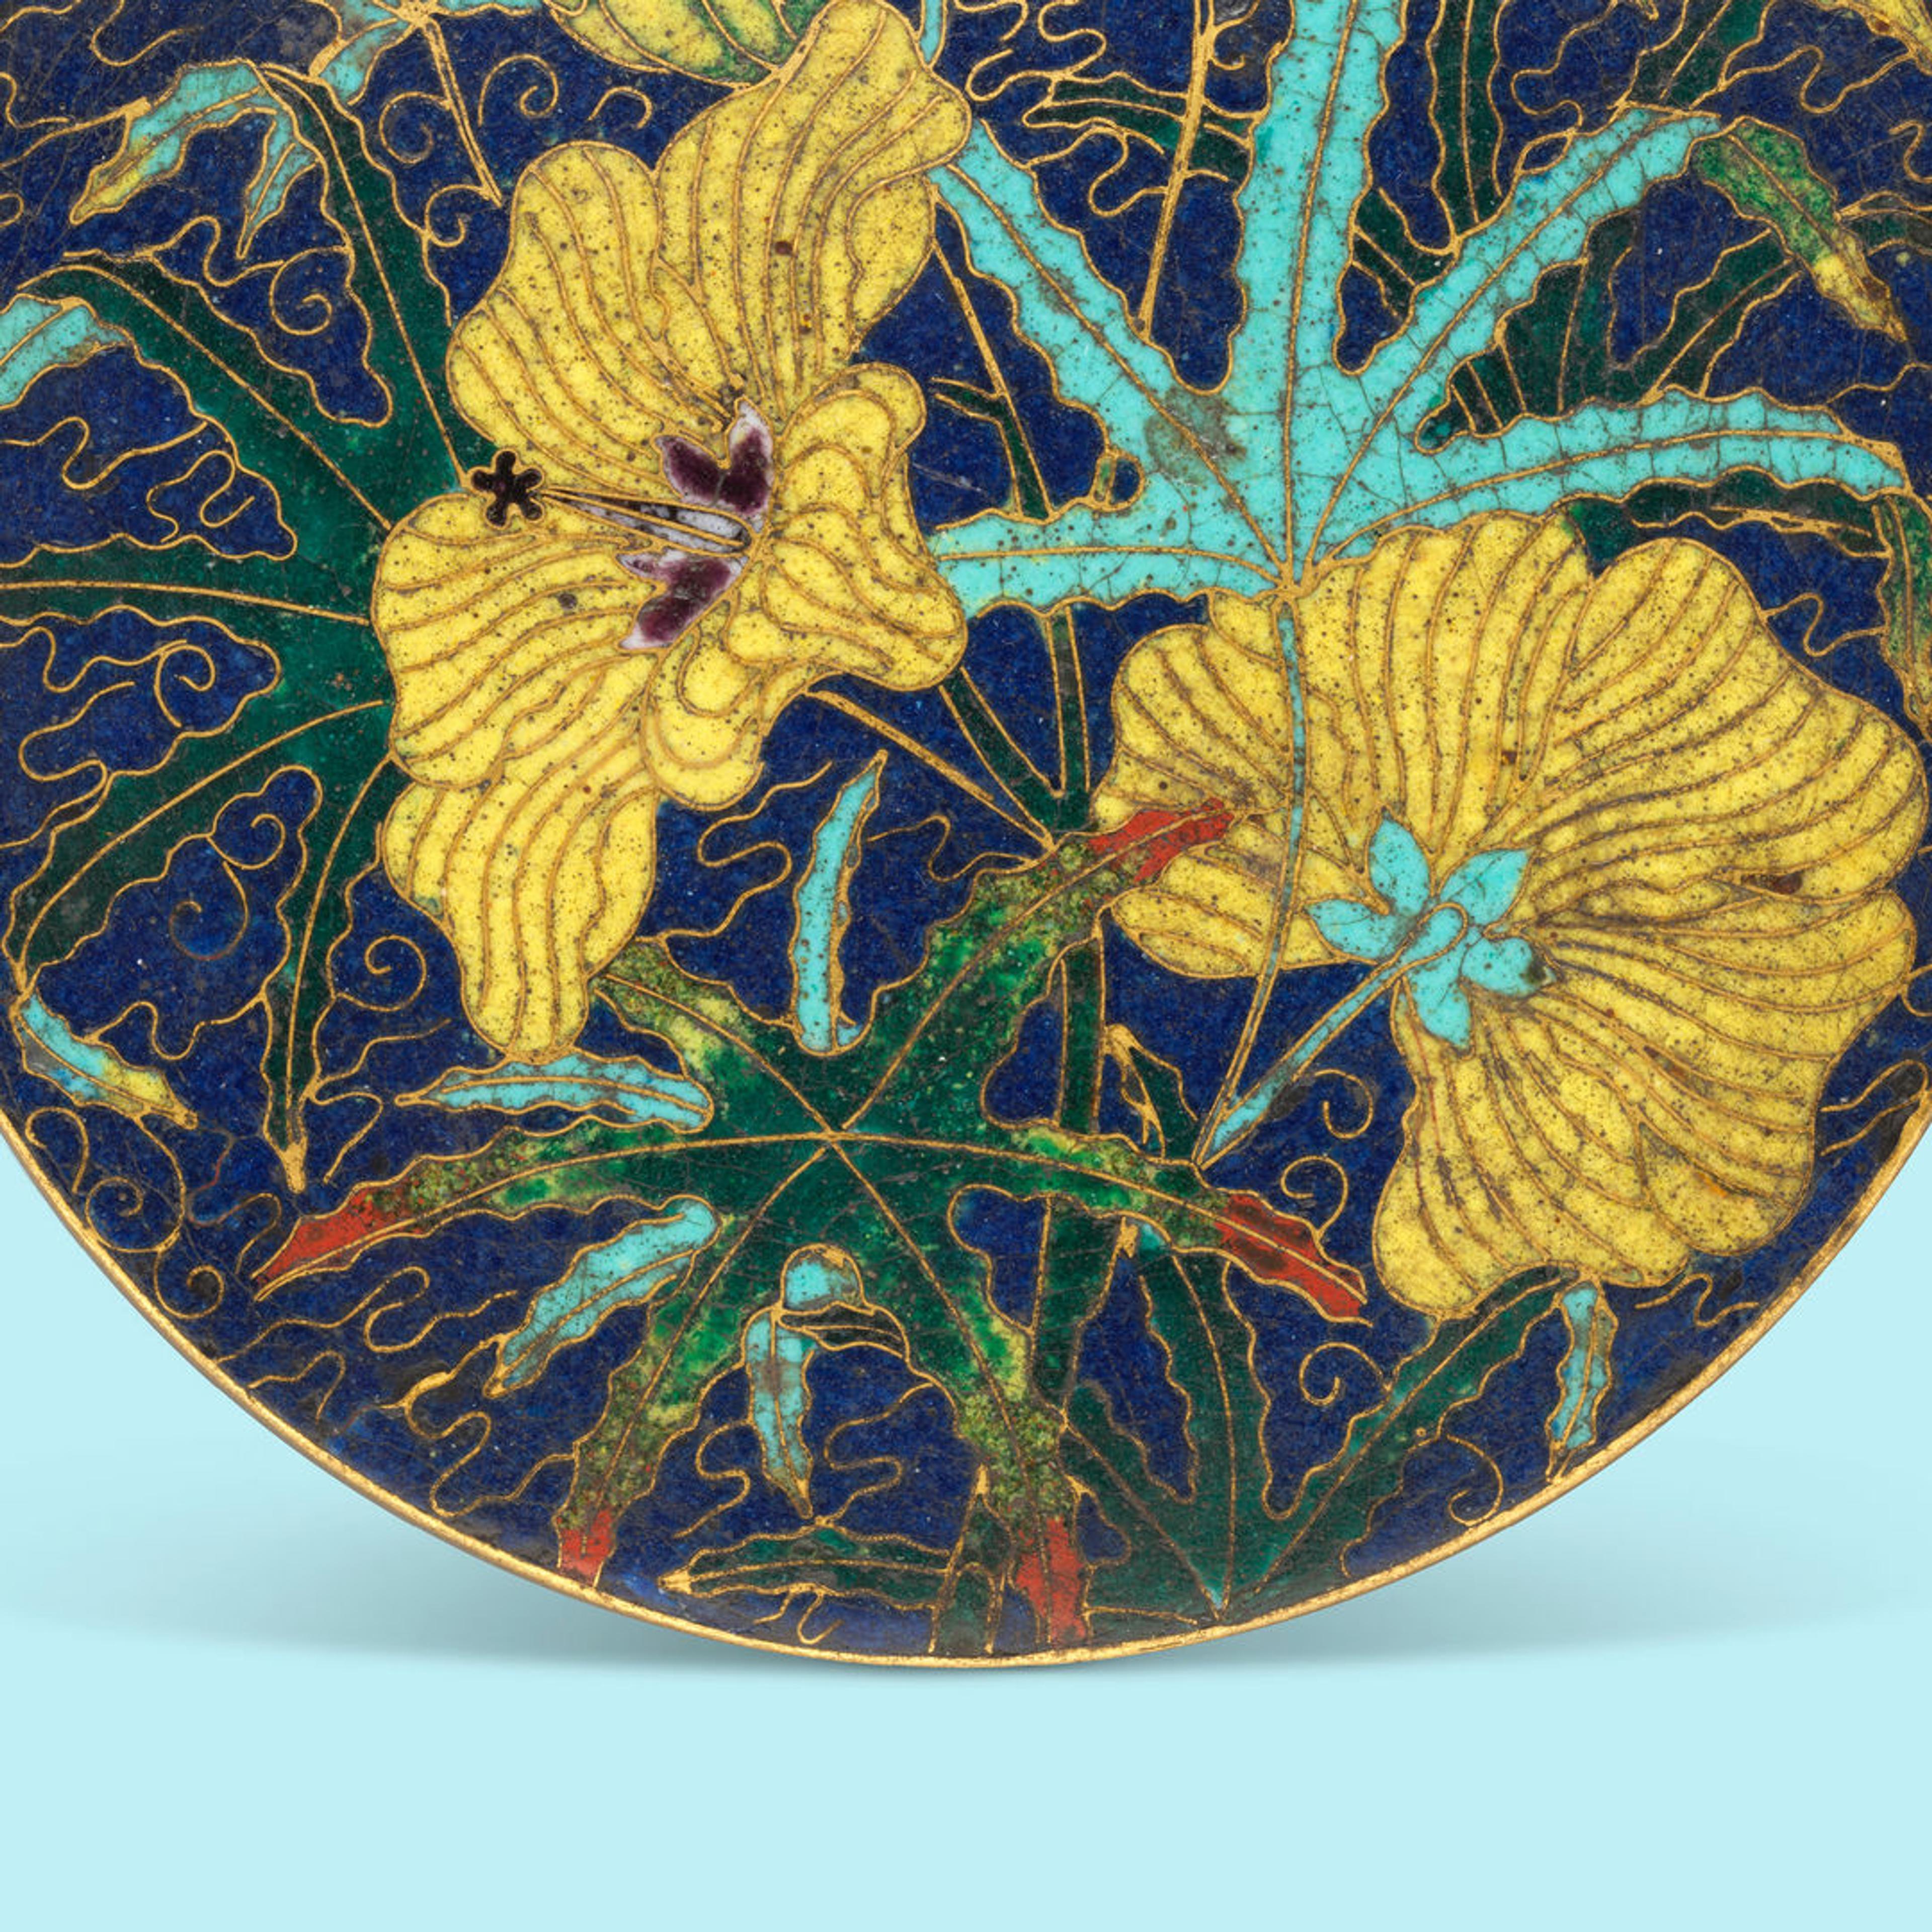 A Pair Of Chinese Painted-enamel Plates With Flowers, 19th Century Auction